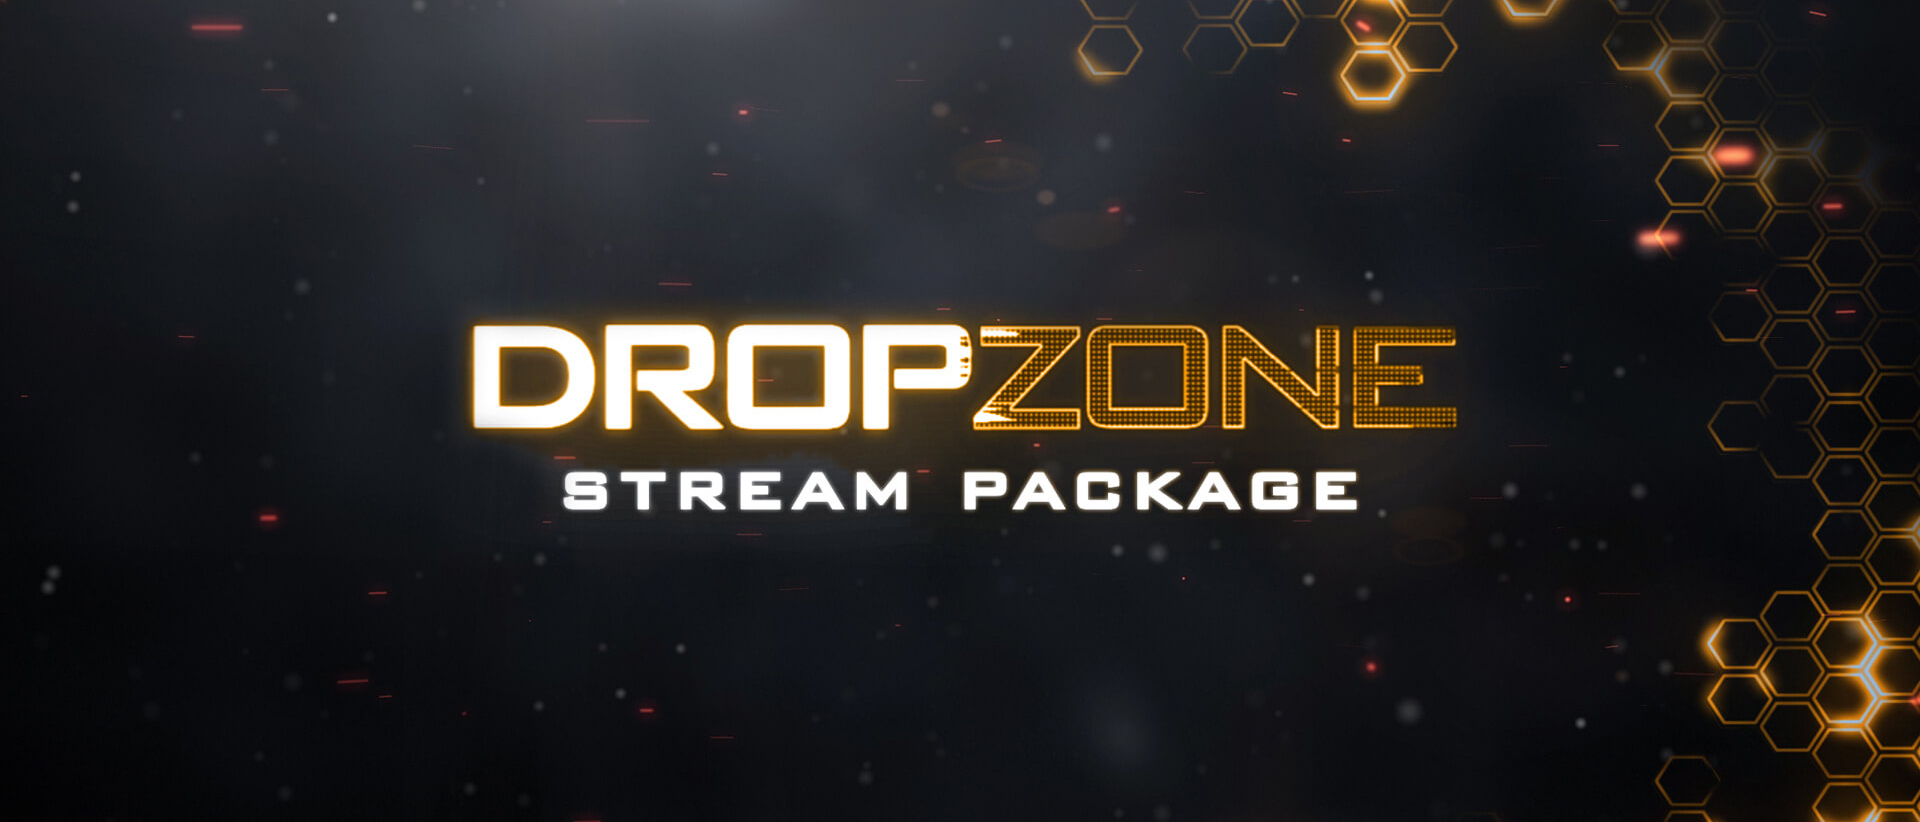 Dropzone - Call of Duty inspired Stream Package